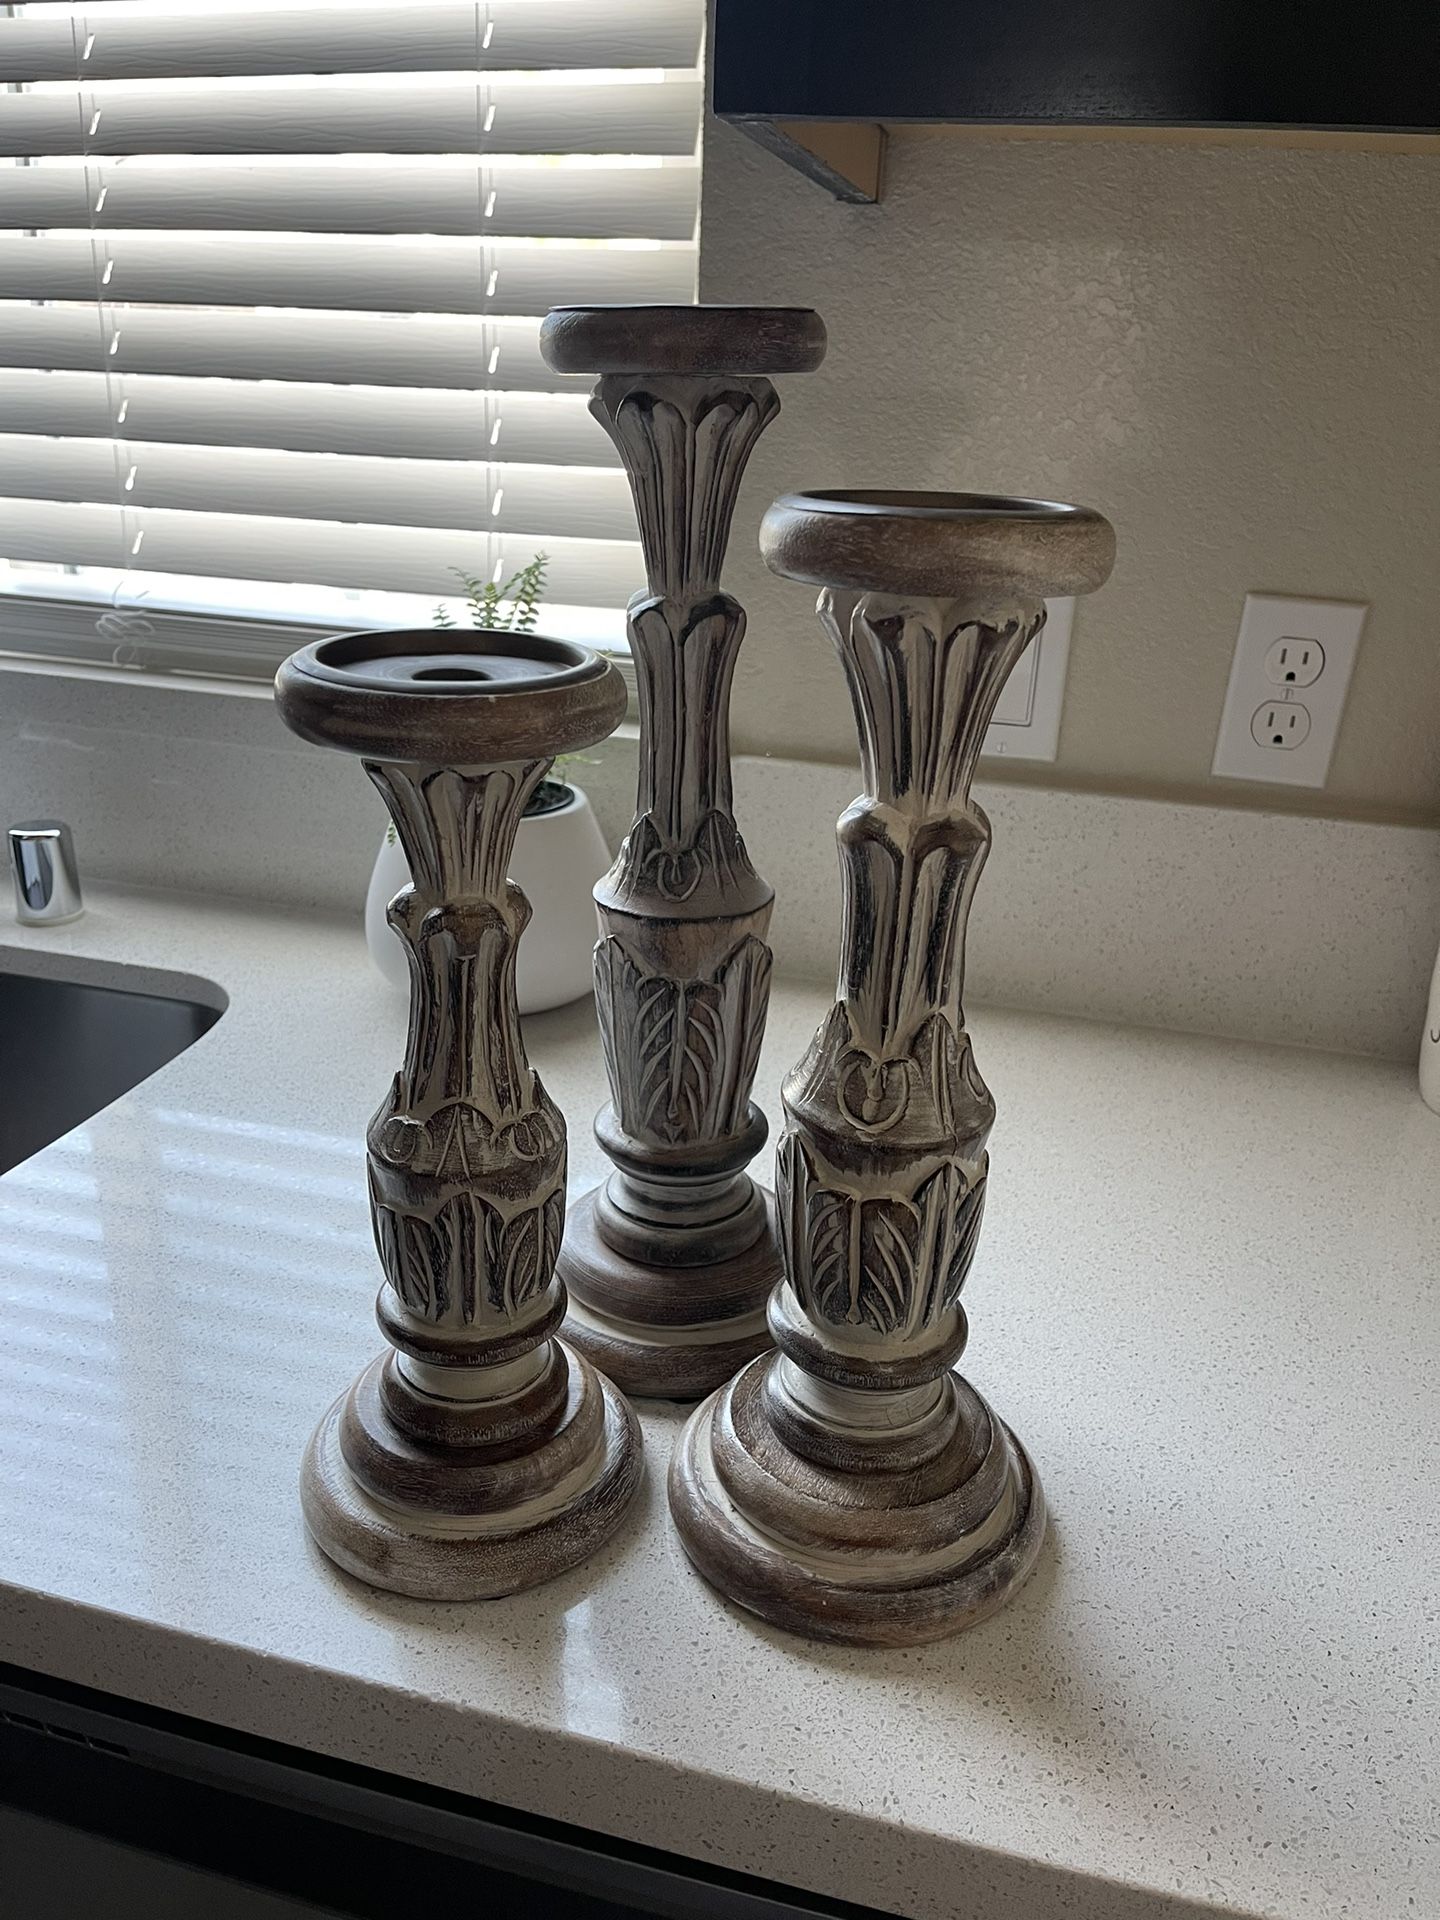 Wood Candle Holders